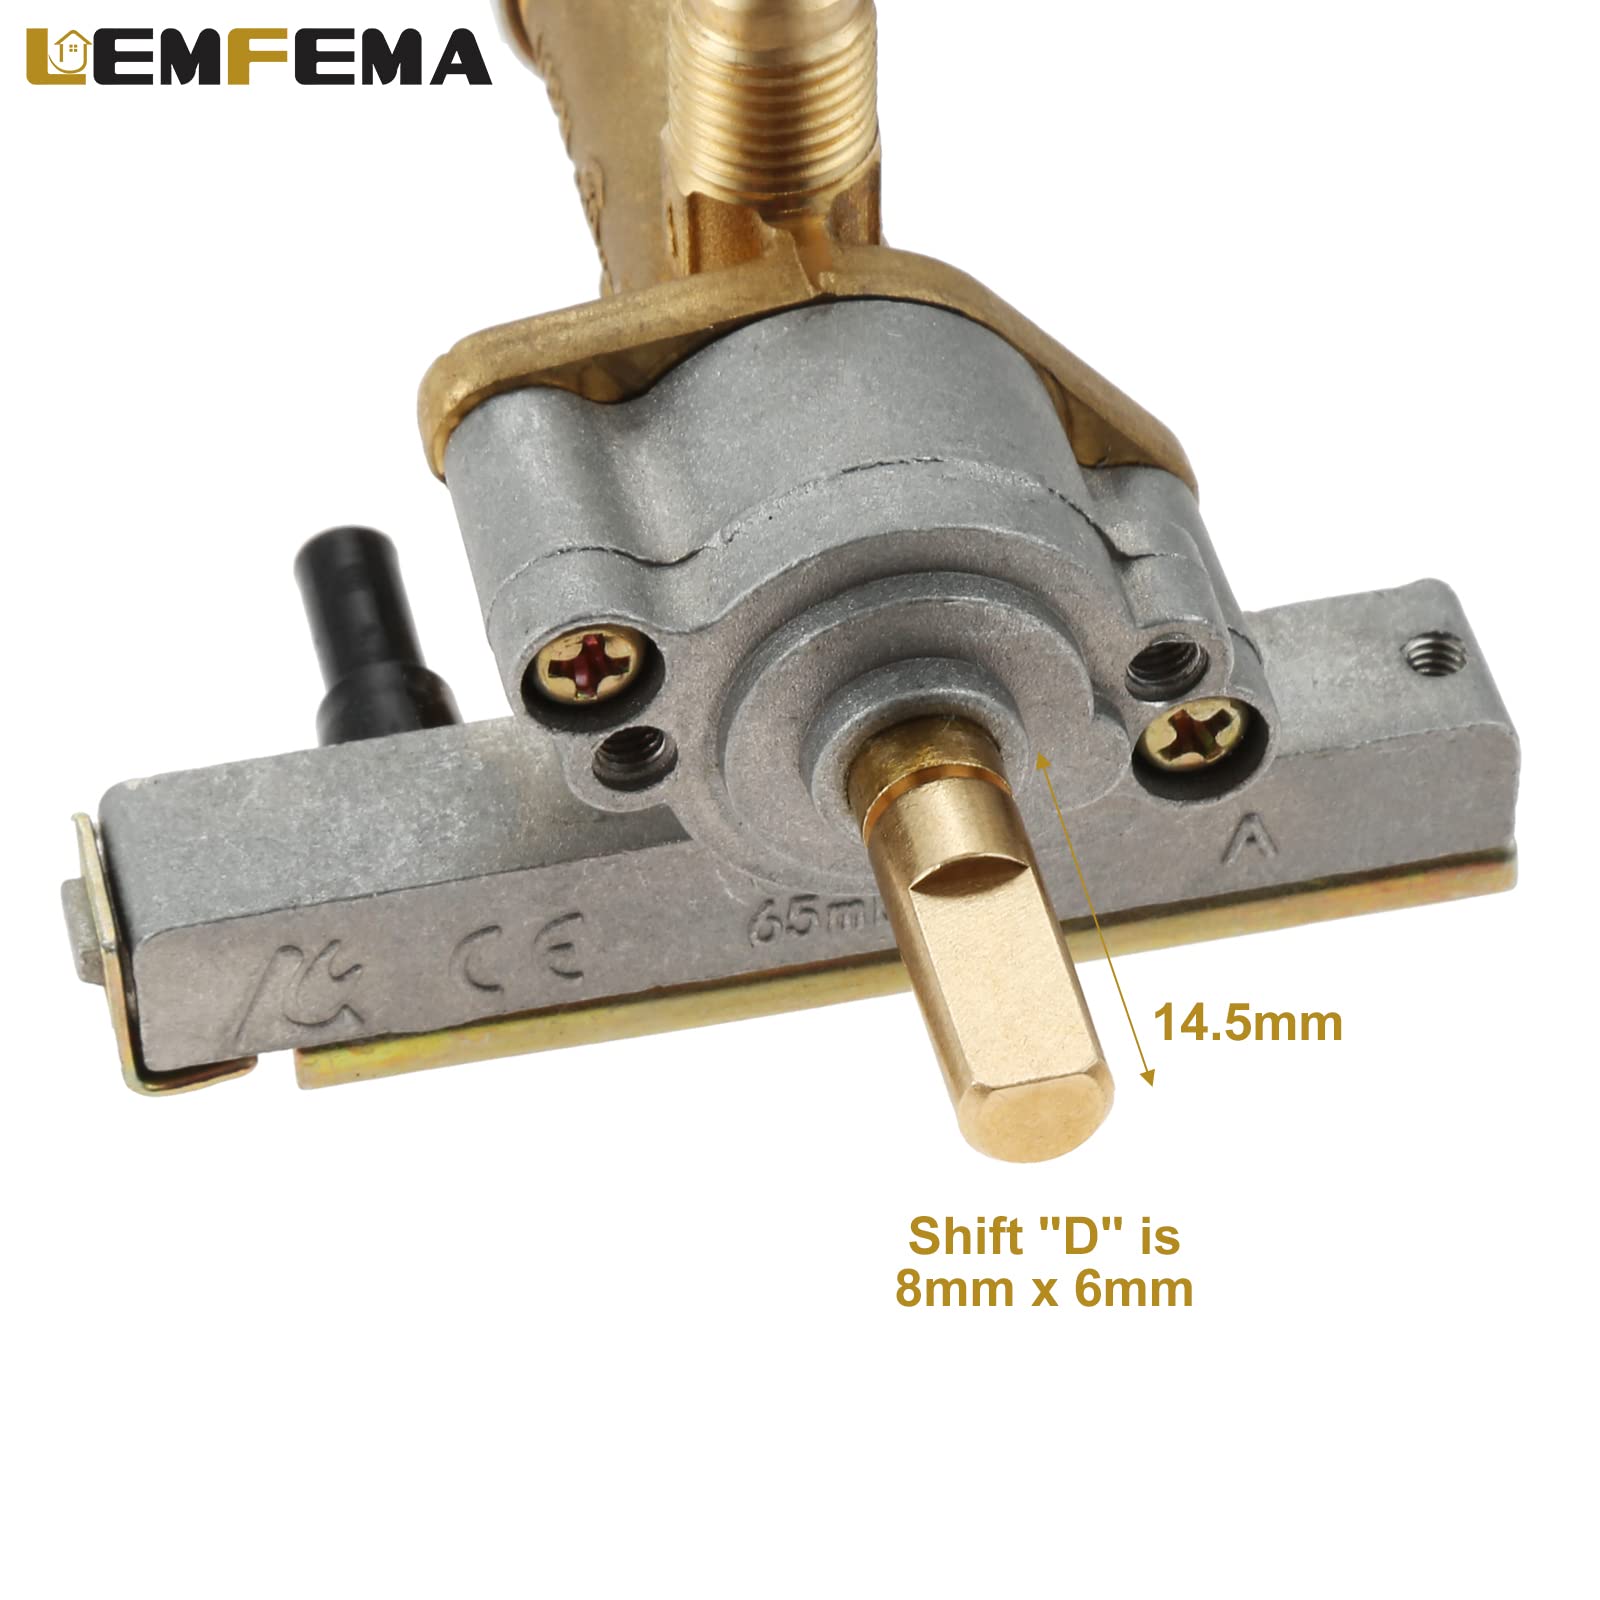 Lemfema Gas Safety Control Valve with Piezo Push Ignition Device Replacement for Garden Sun Propane Powered Patio Heater Repair Replaces Parts（7/16"-24 UNEF Inlet & Outlet）